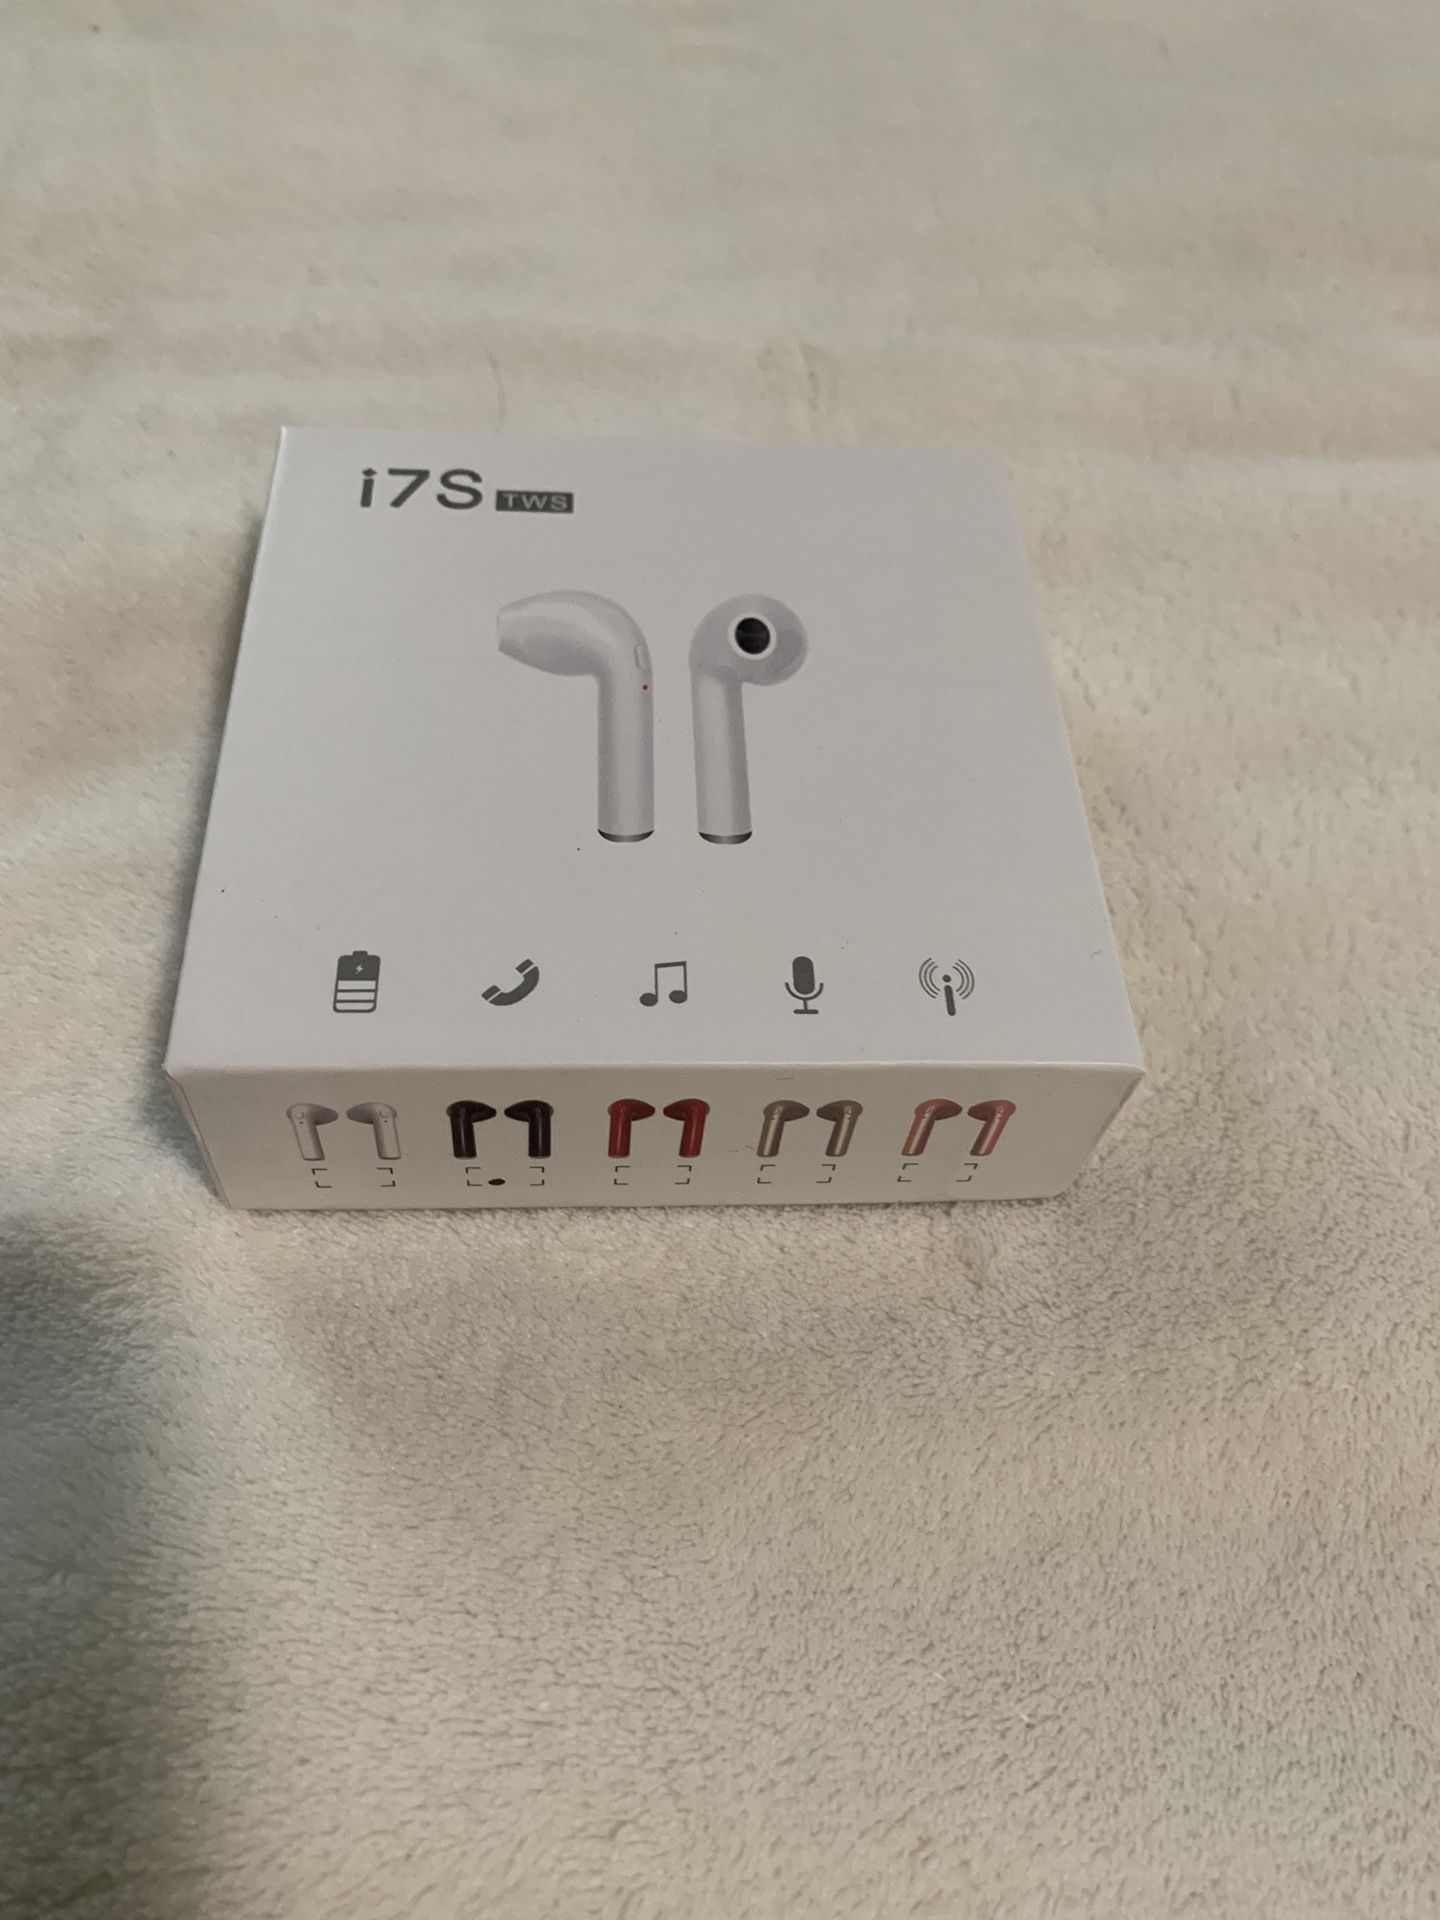 Generic airpods white color